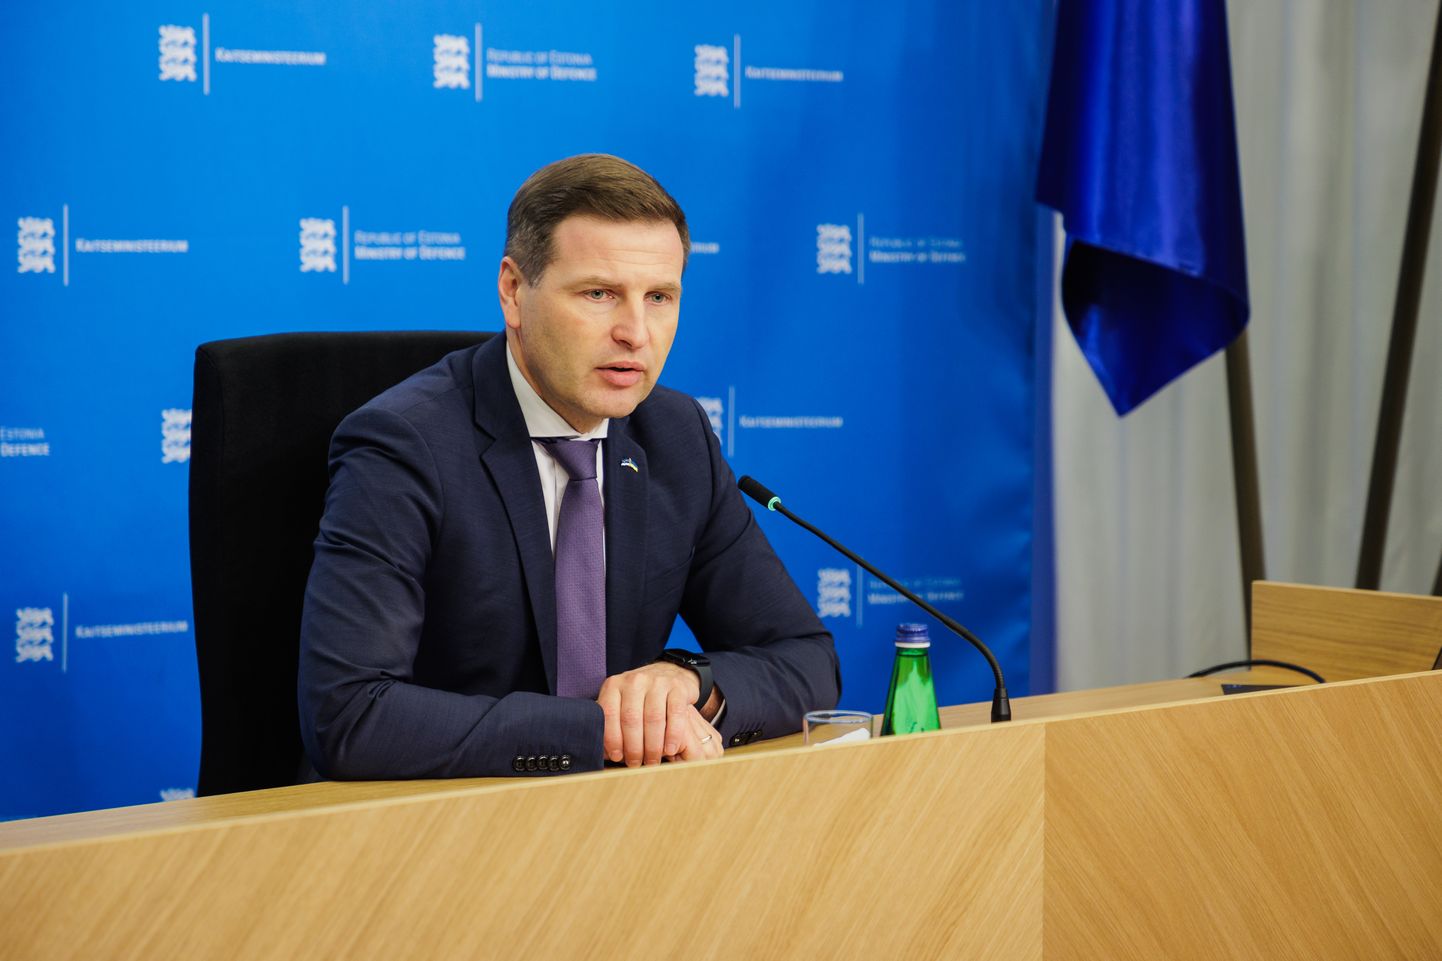 Minister of Defense Hanno Pevkur at a press conference on Monday.